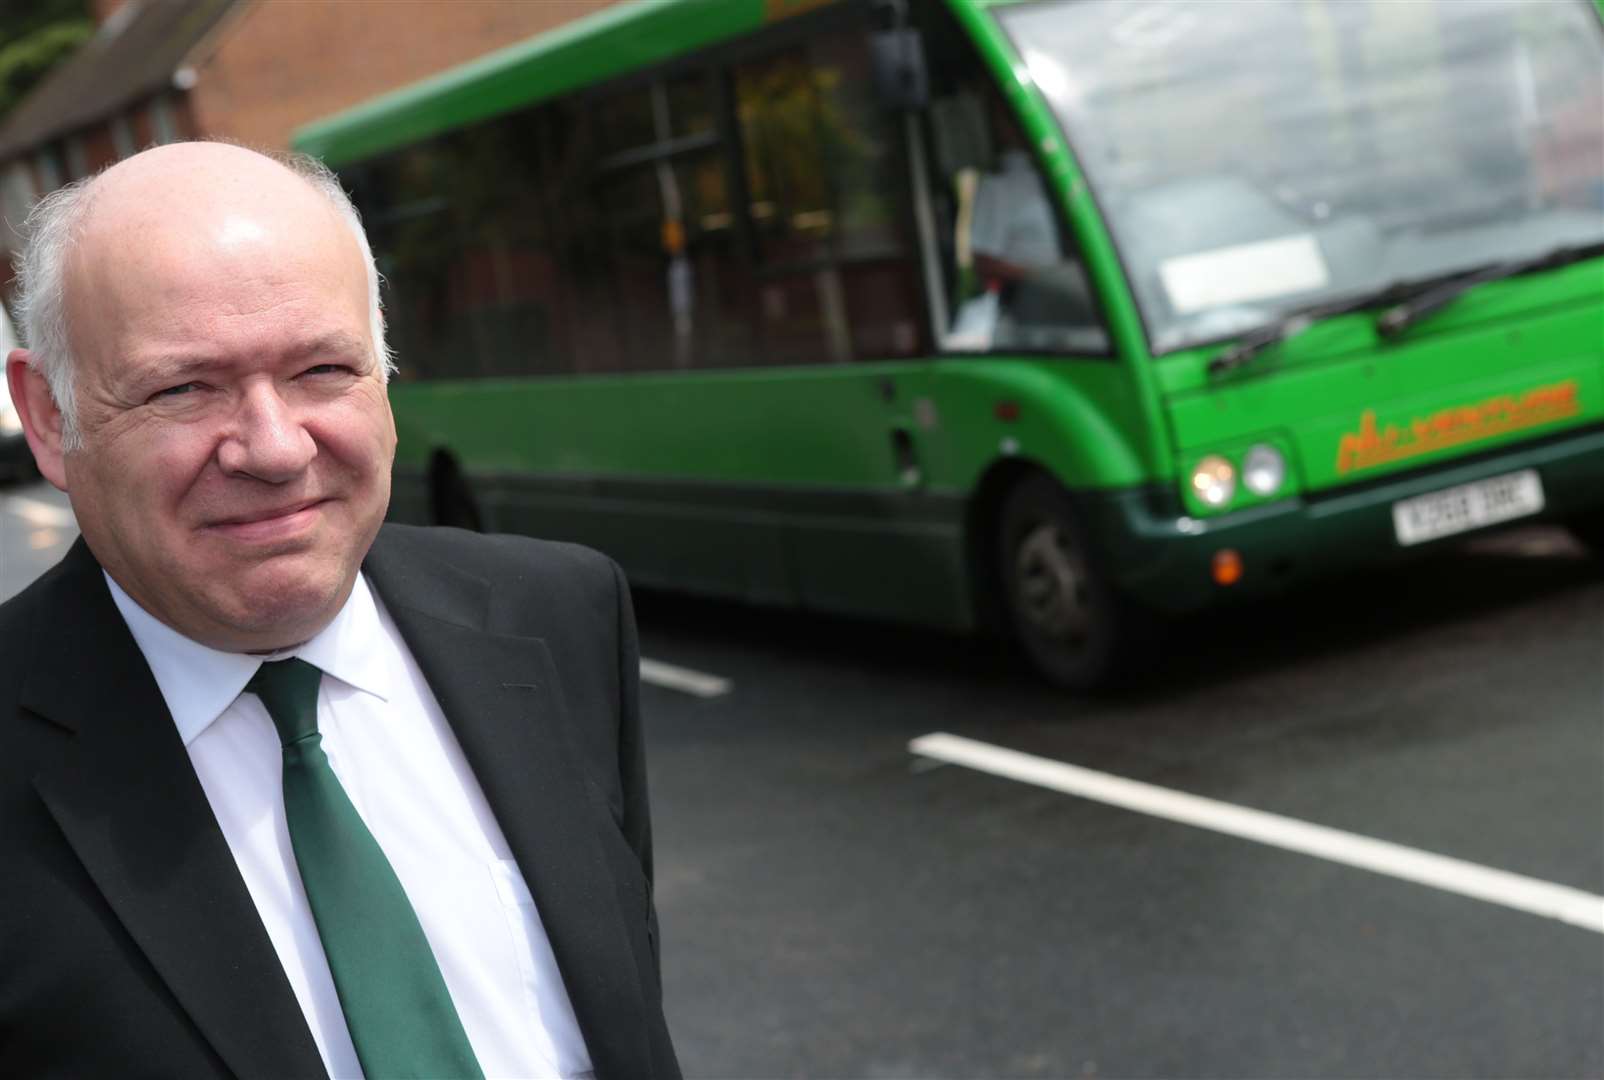 Bus boss Norman Kemp says a bus was also targeted.